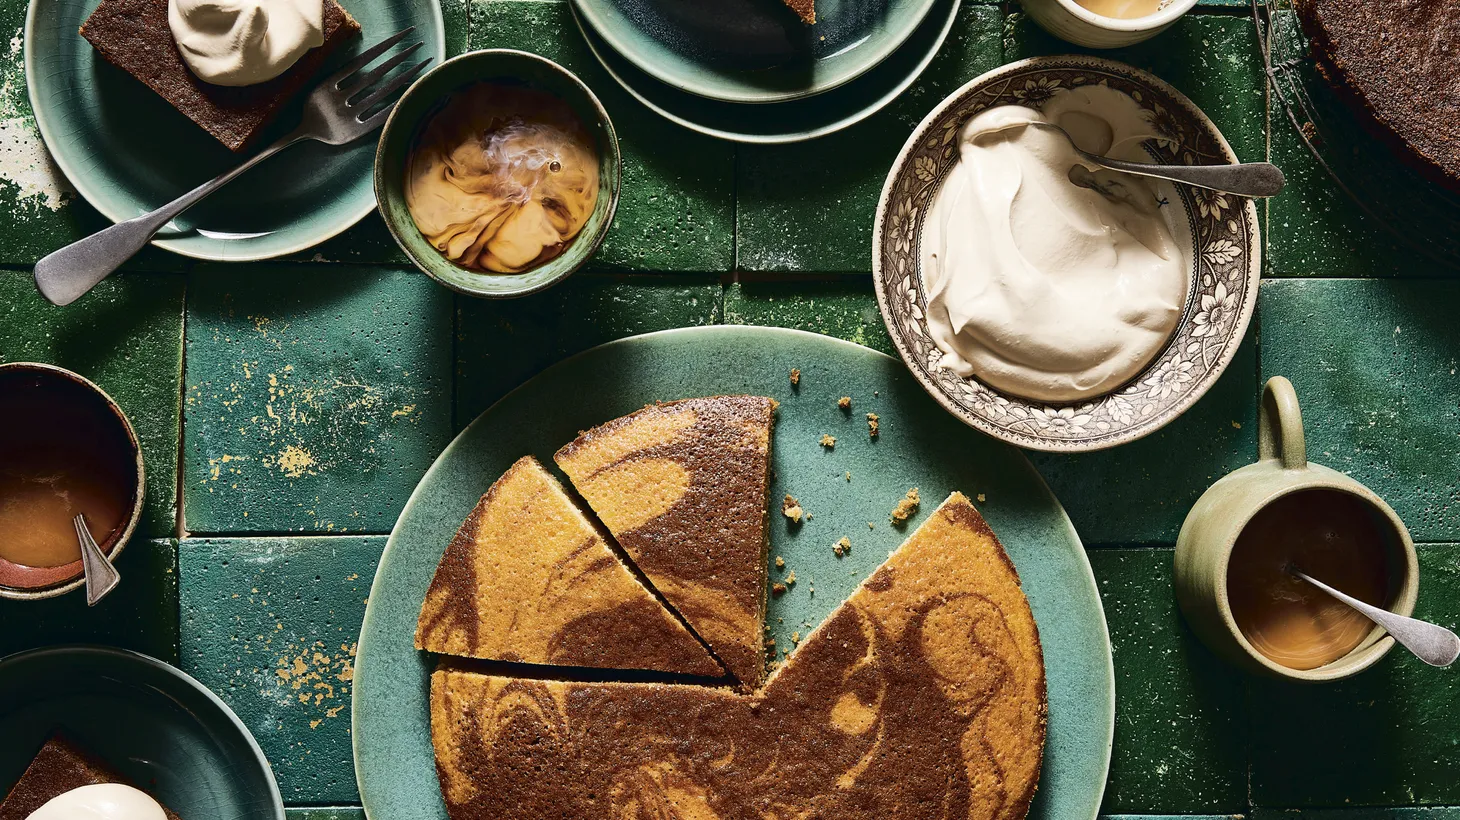 Not a traditional coffee cake, Andrea Nguyen's mocha cake, which you can see in the upper left corner, took 30 trials to perfect. The cake in the center is the Spice-Citrus Marble Cake, which is also delicious.